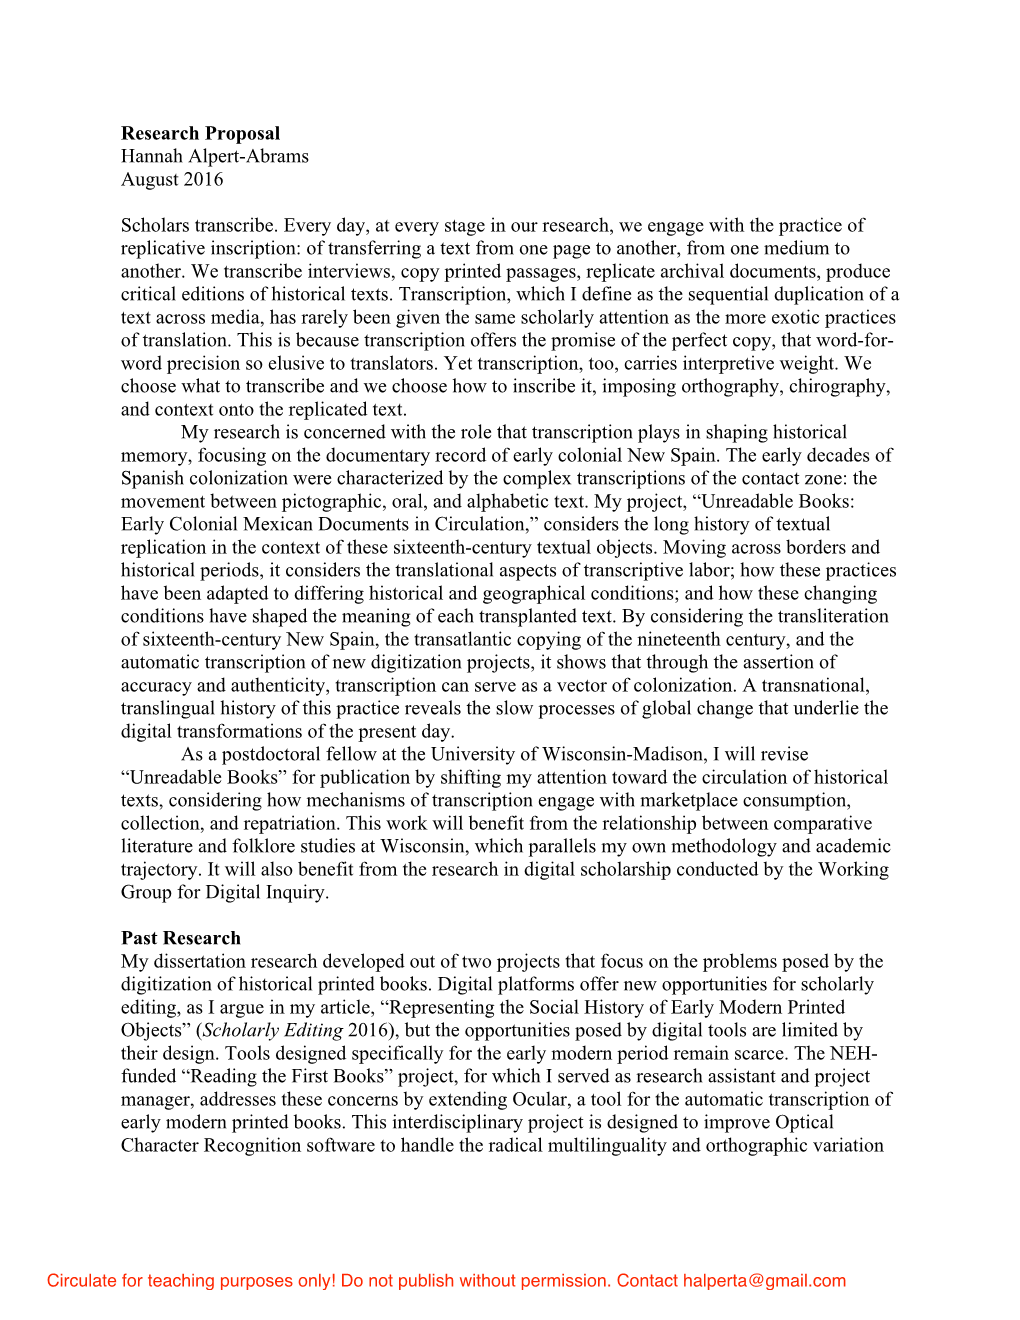 Proposal (Research Statement)